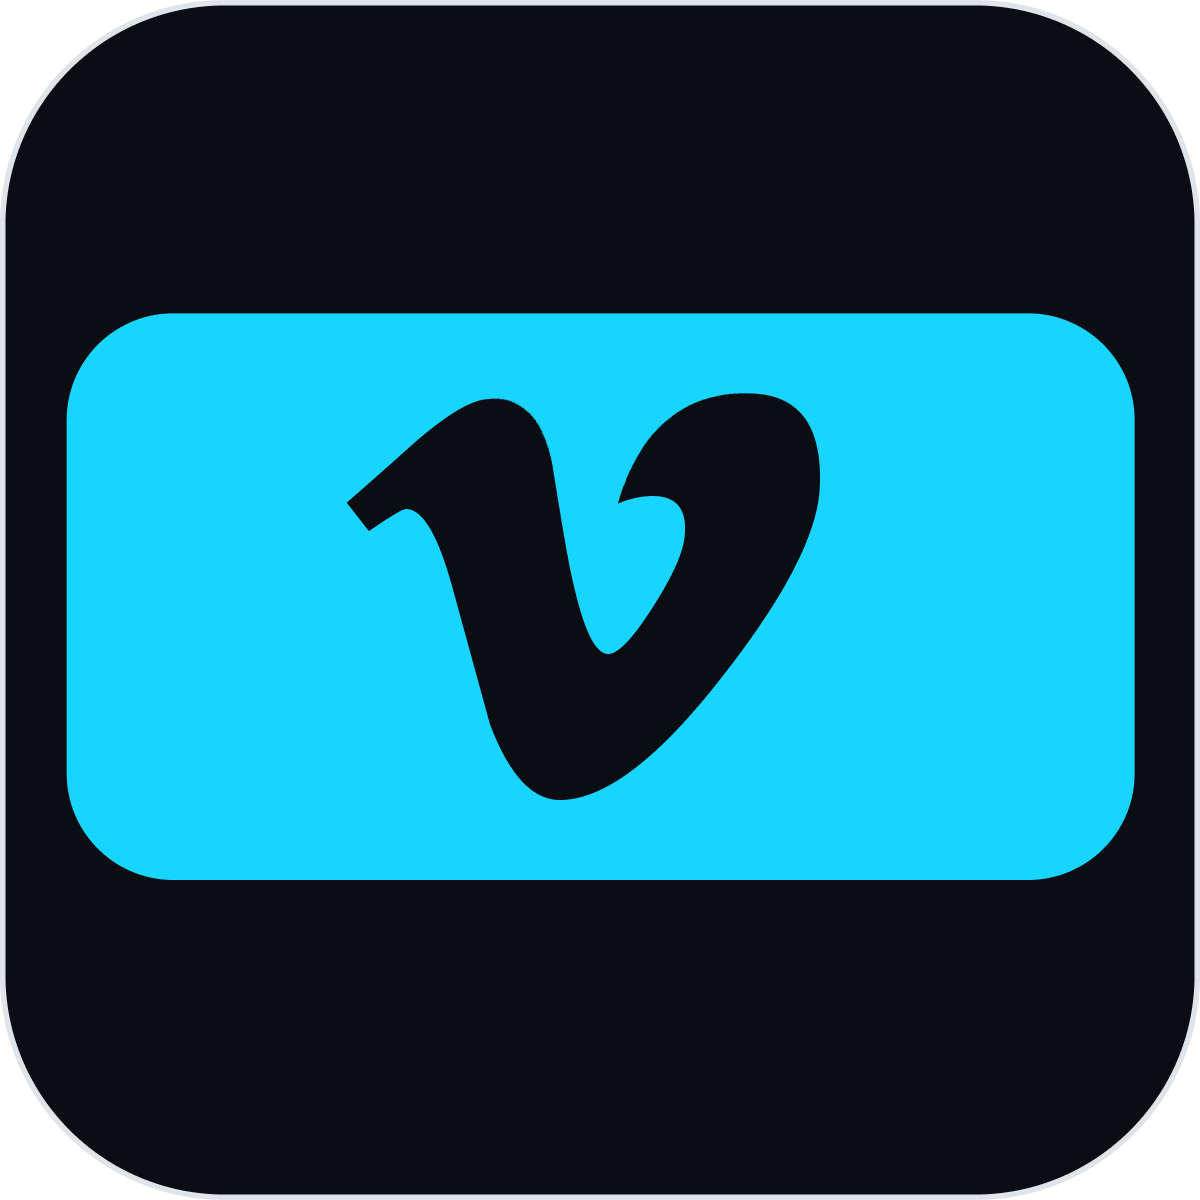 V_Square_Icon_400x400.png